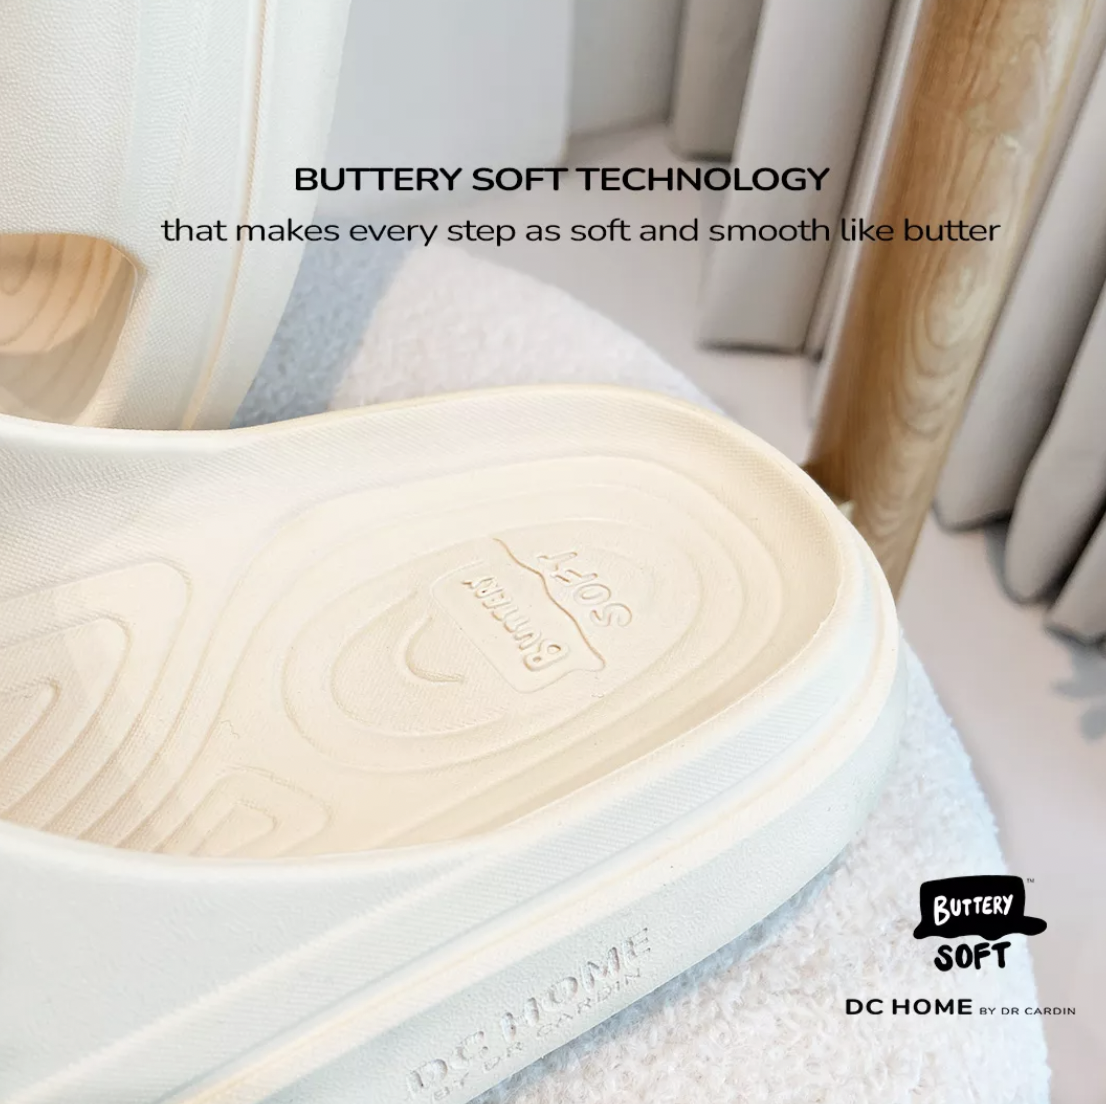 DC Home Sandals powered by Buttery Soft Technology